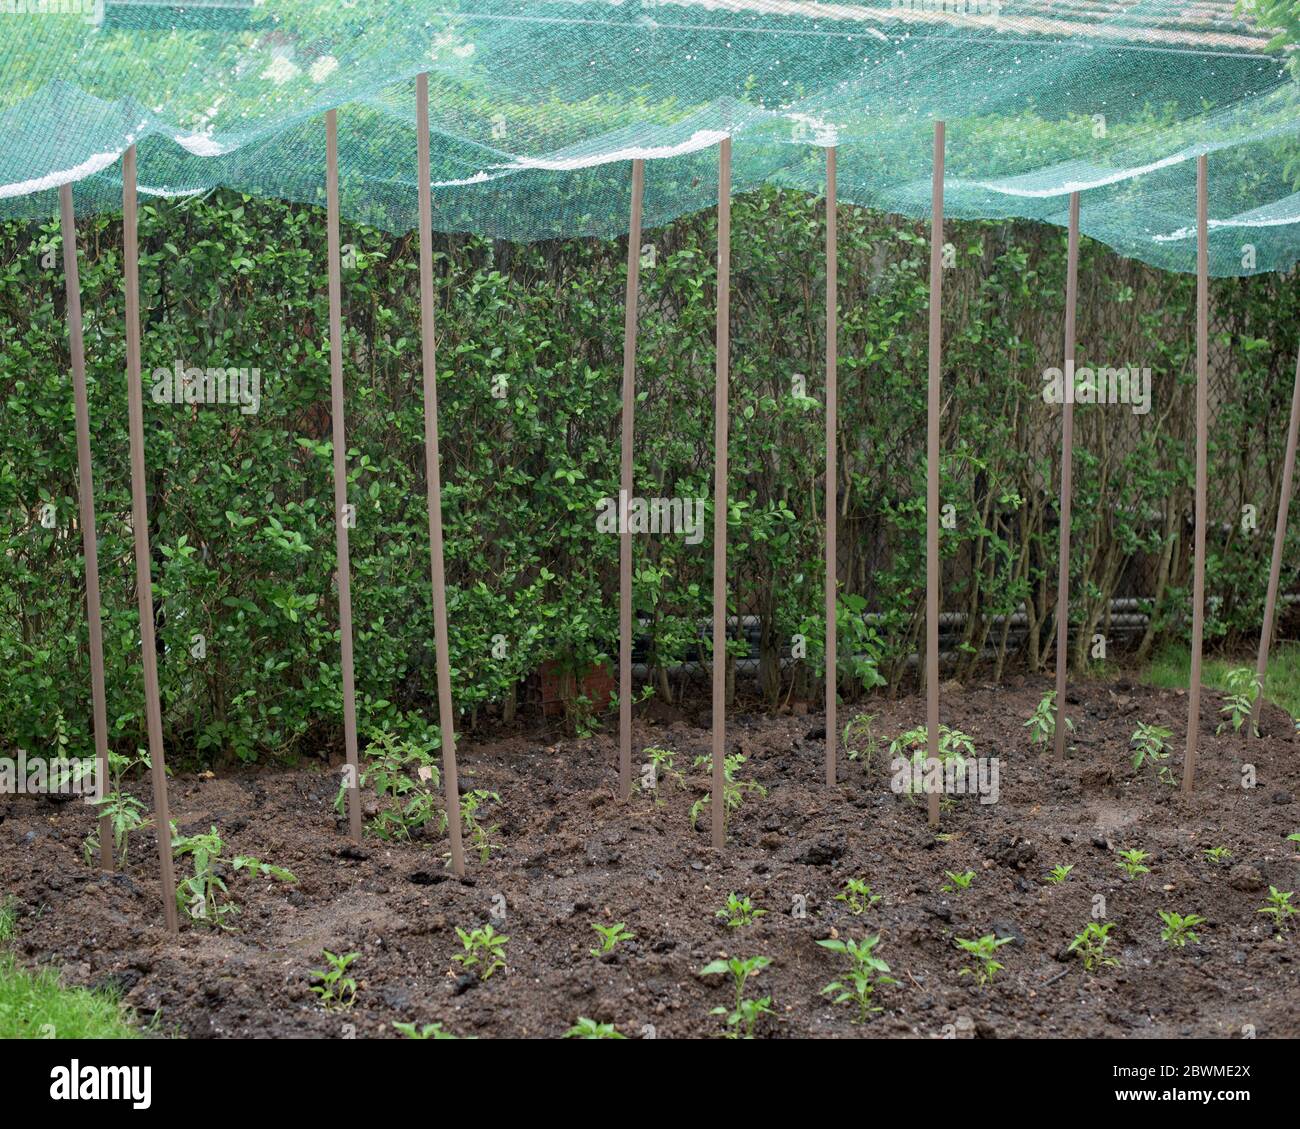 Hailstone in a protective net over vegetable plants in a garden Stock Photo